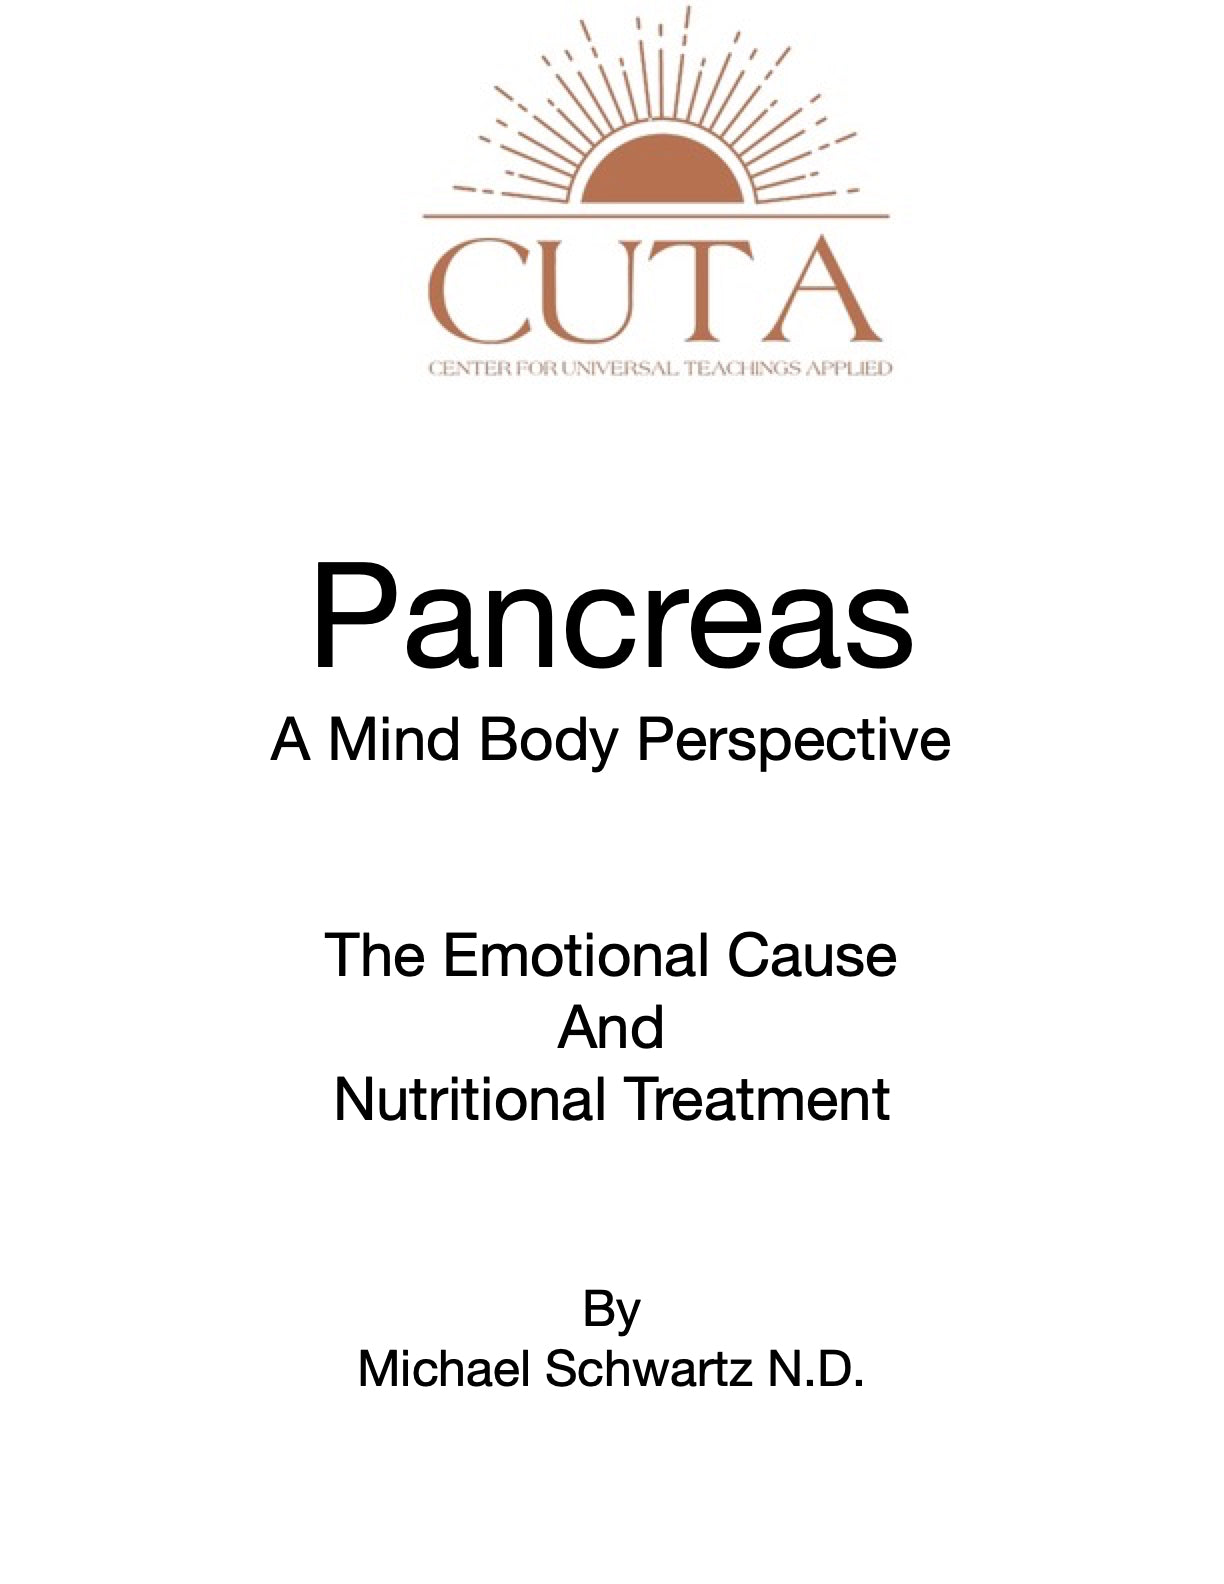 Pancreas Issues Booklet